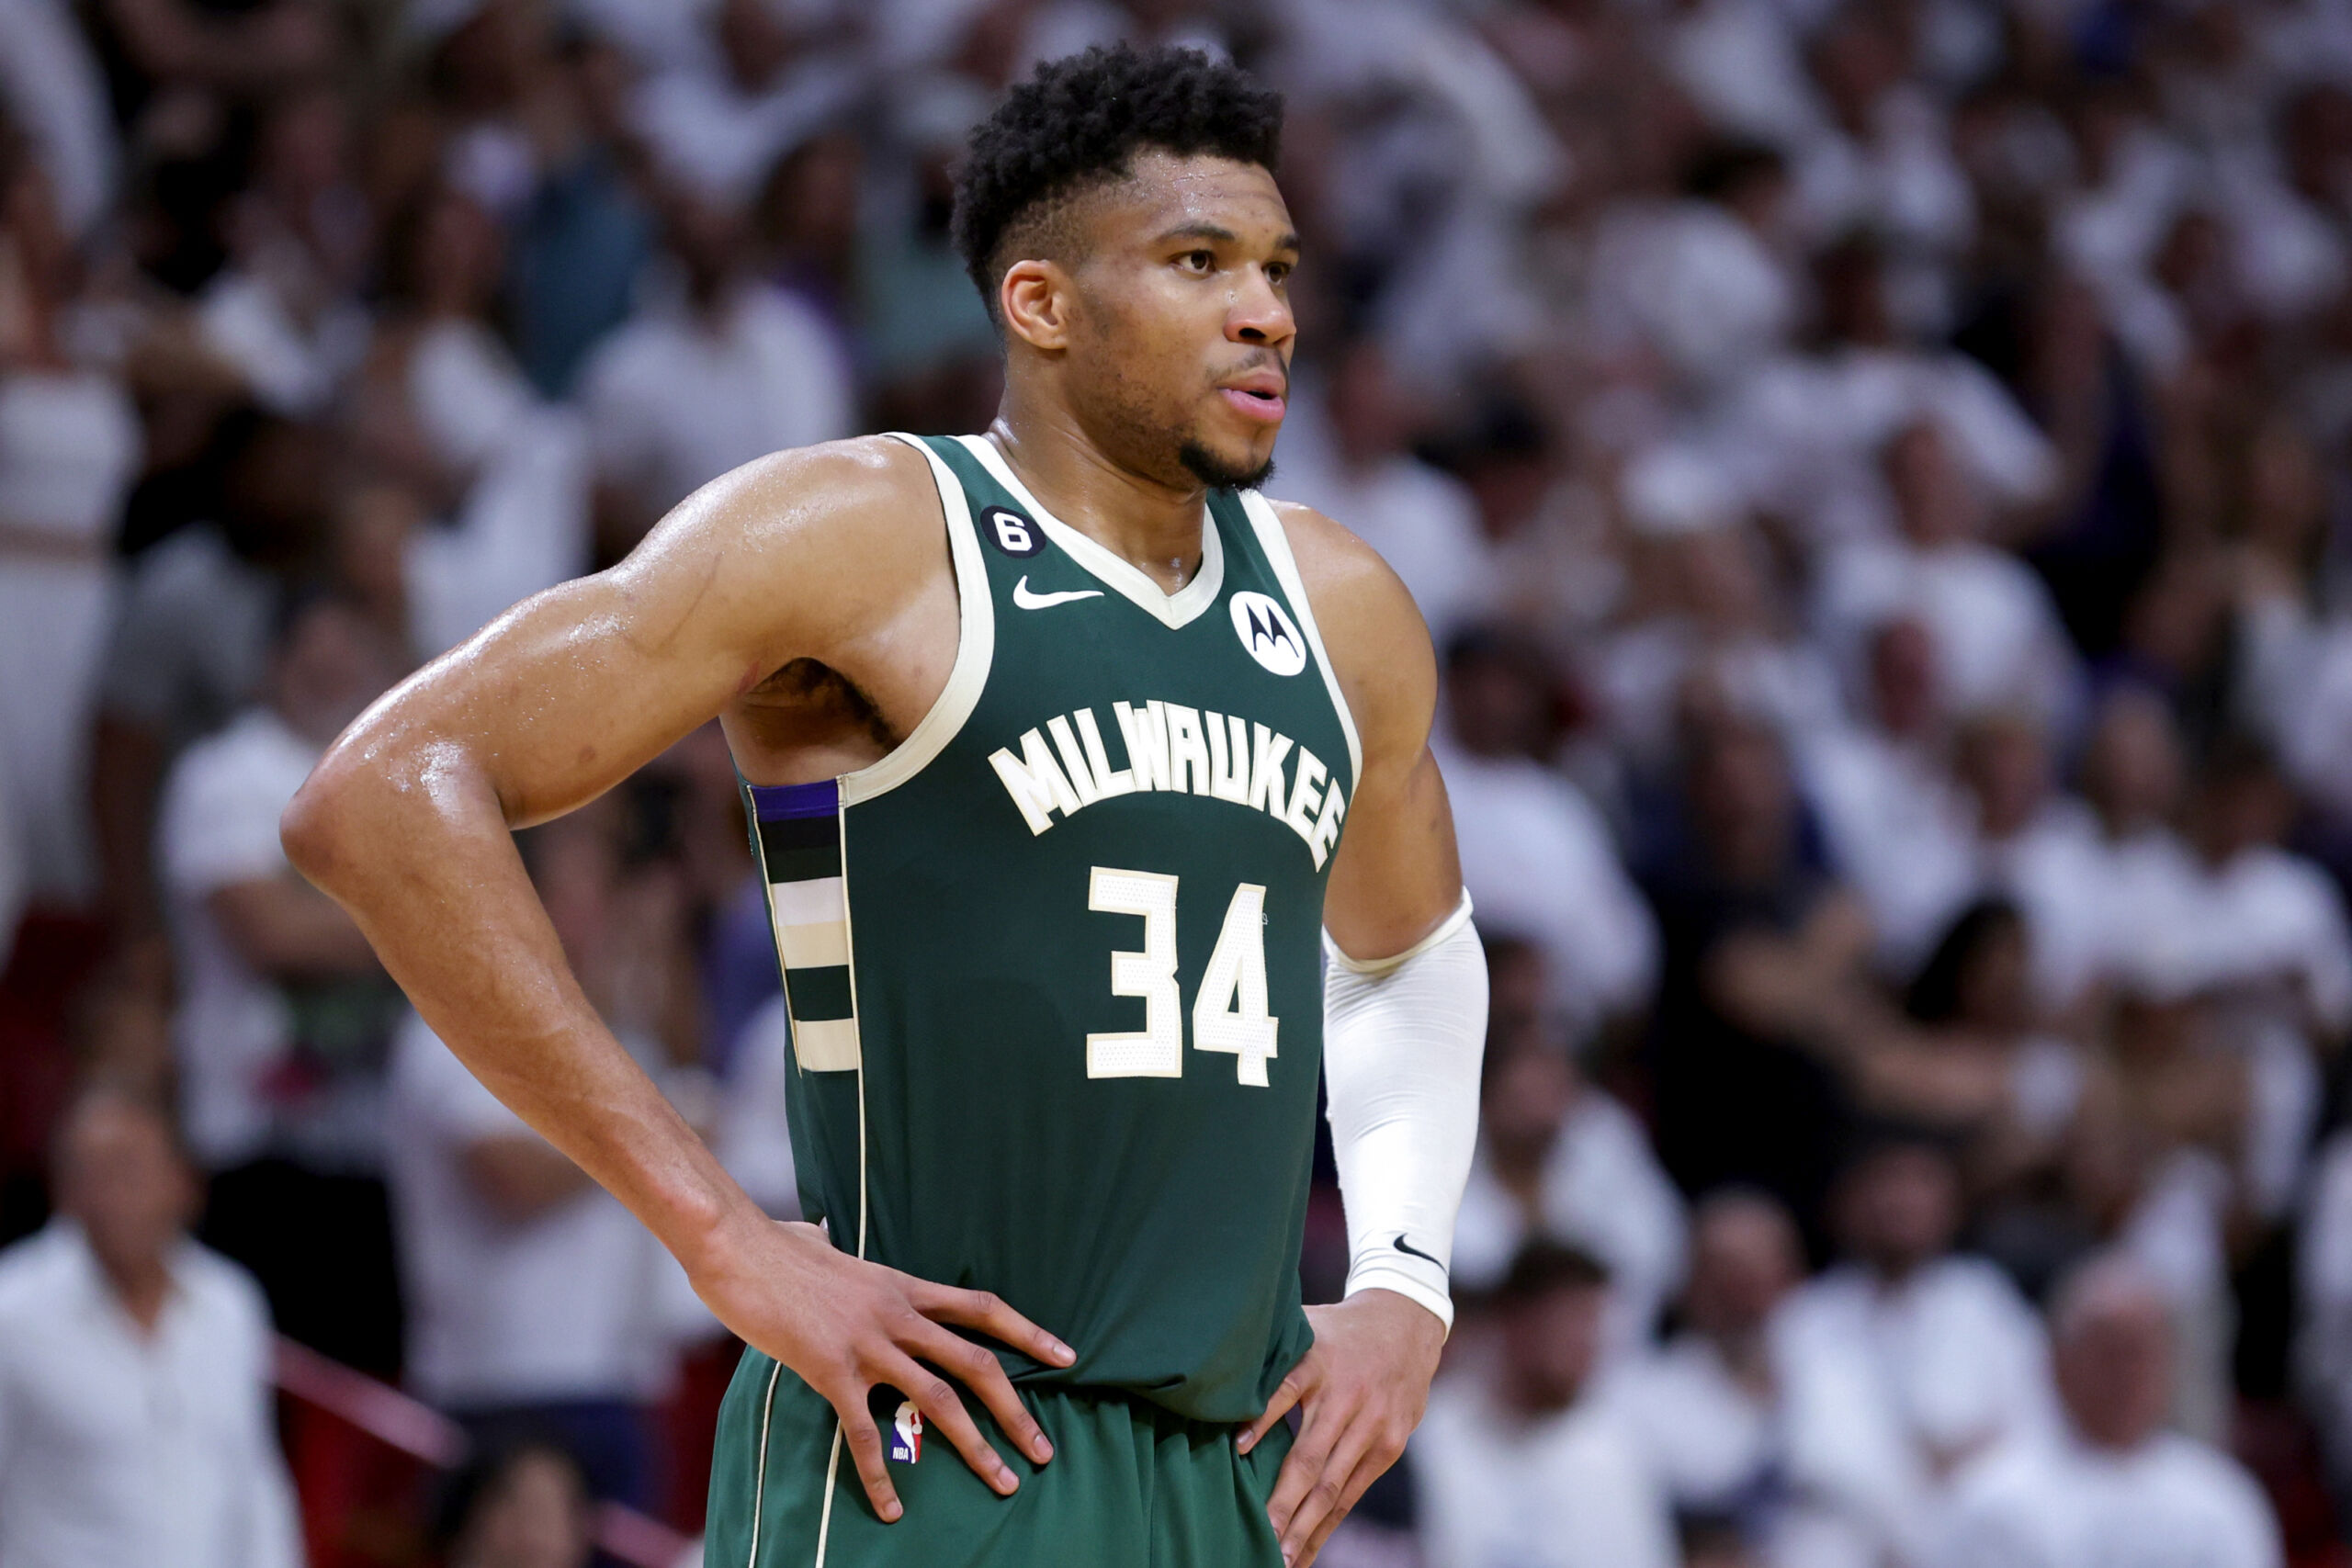 When will Giannis Antetokounmpo become a free agent? Exploring the